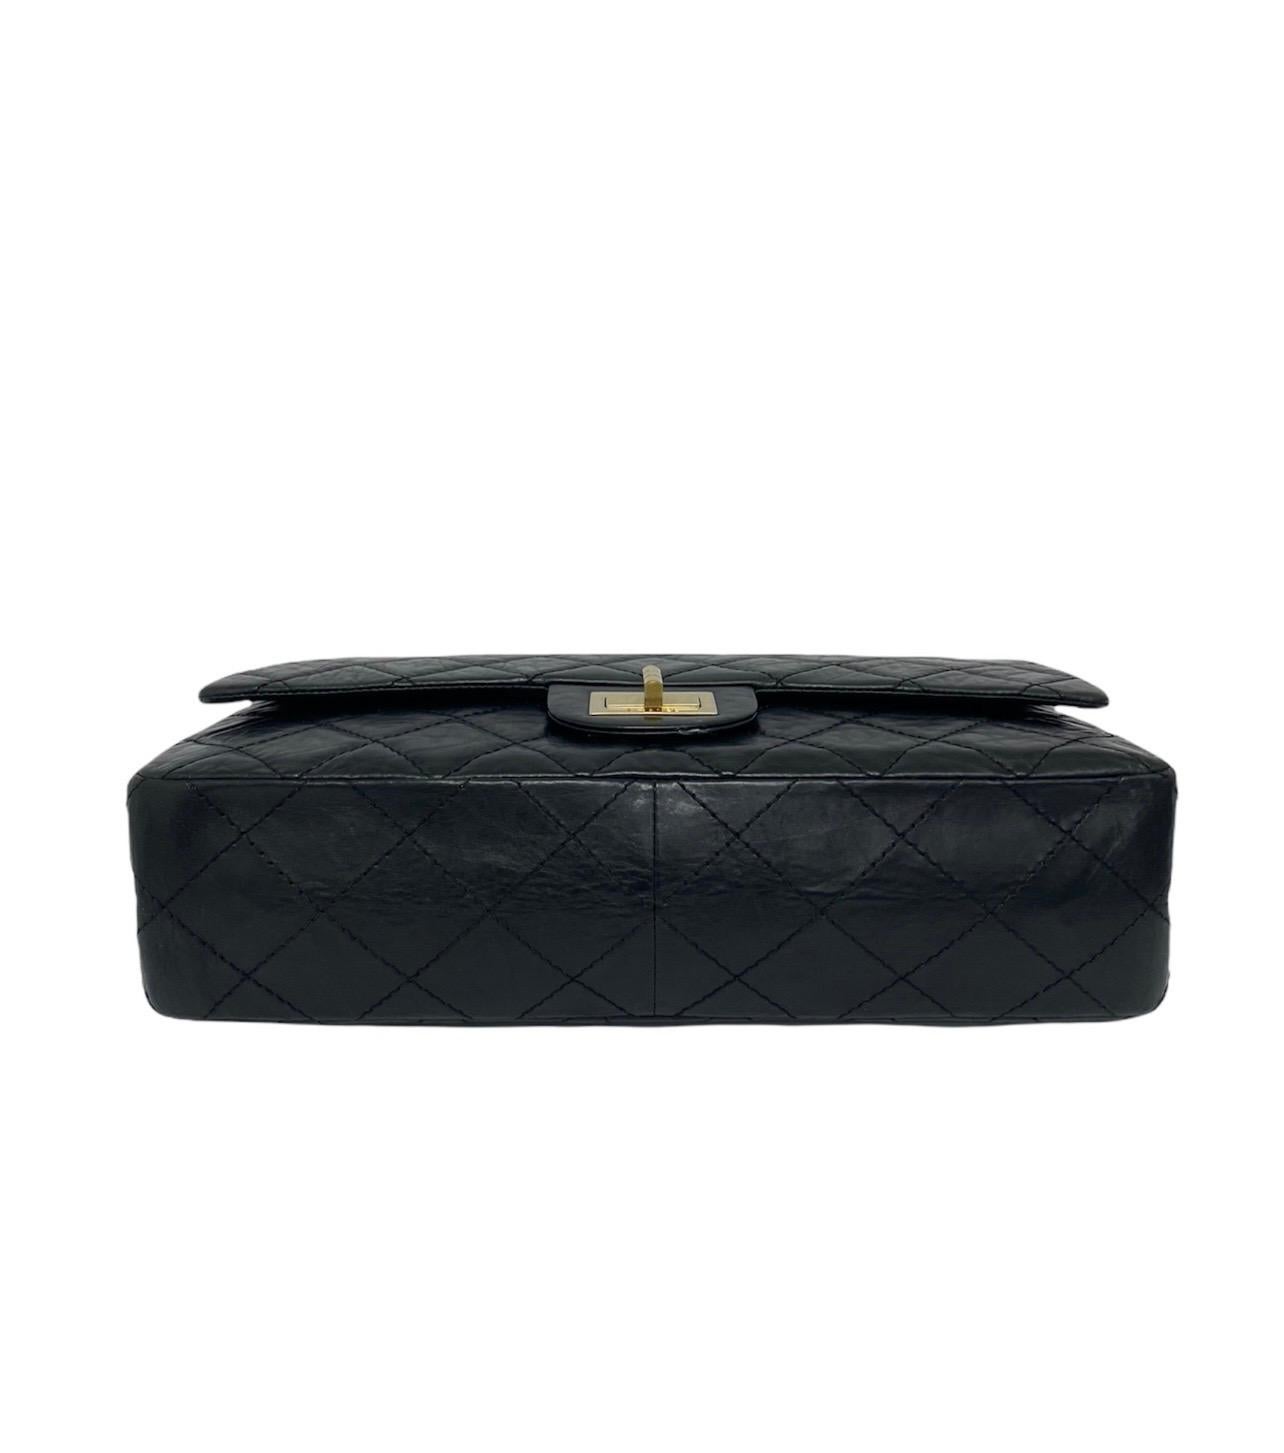 Women's Chanel Black Leather 2.55 Limited Edition Bag